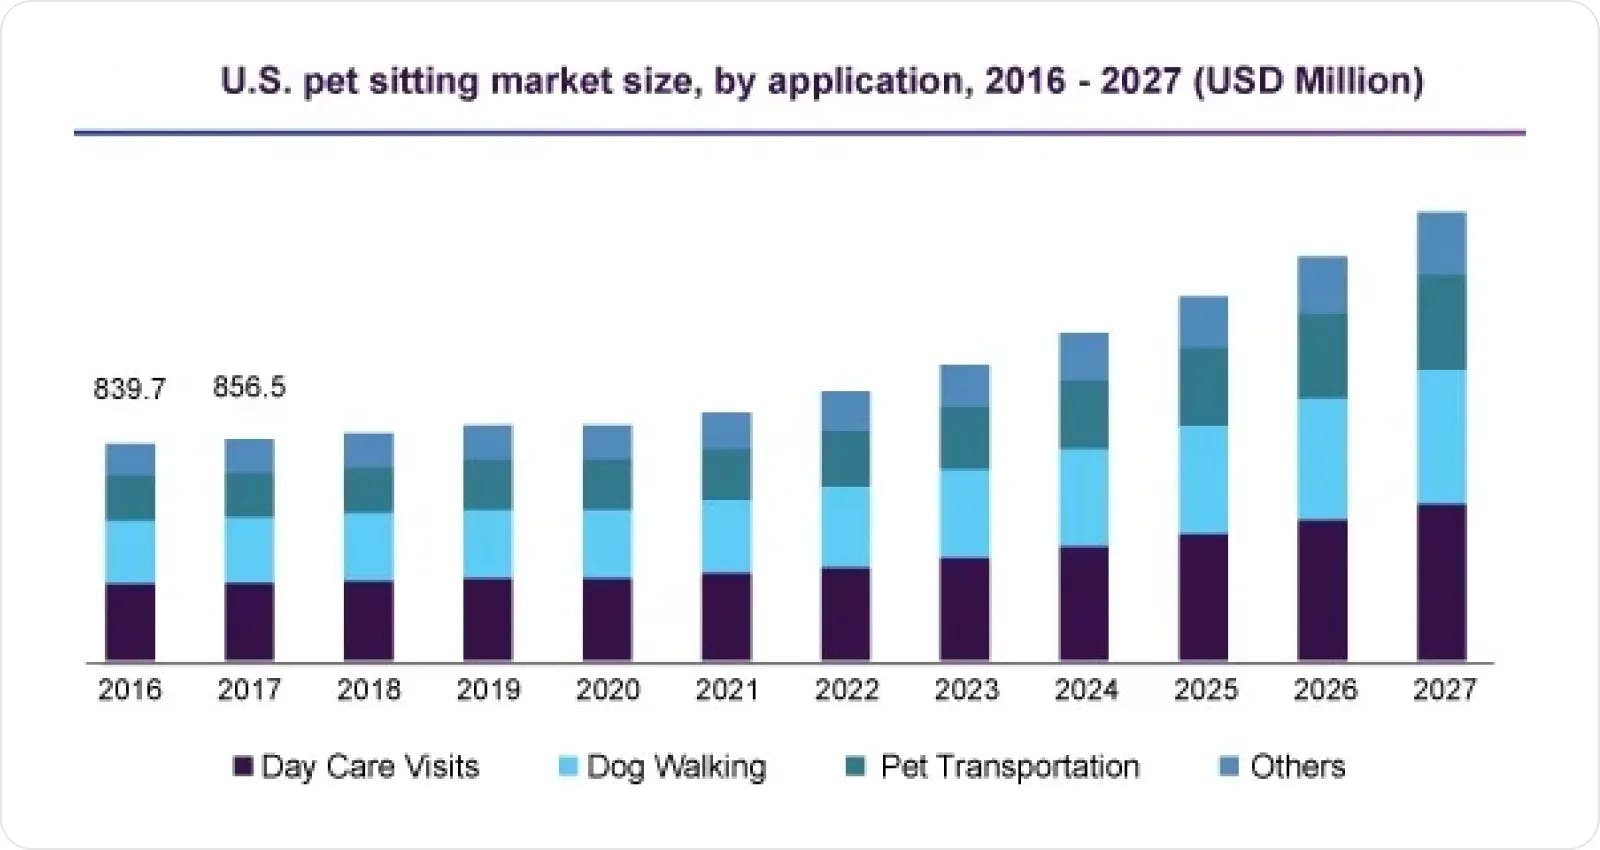 US pet sitting market size between 2020 and 2027